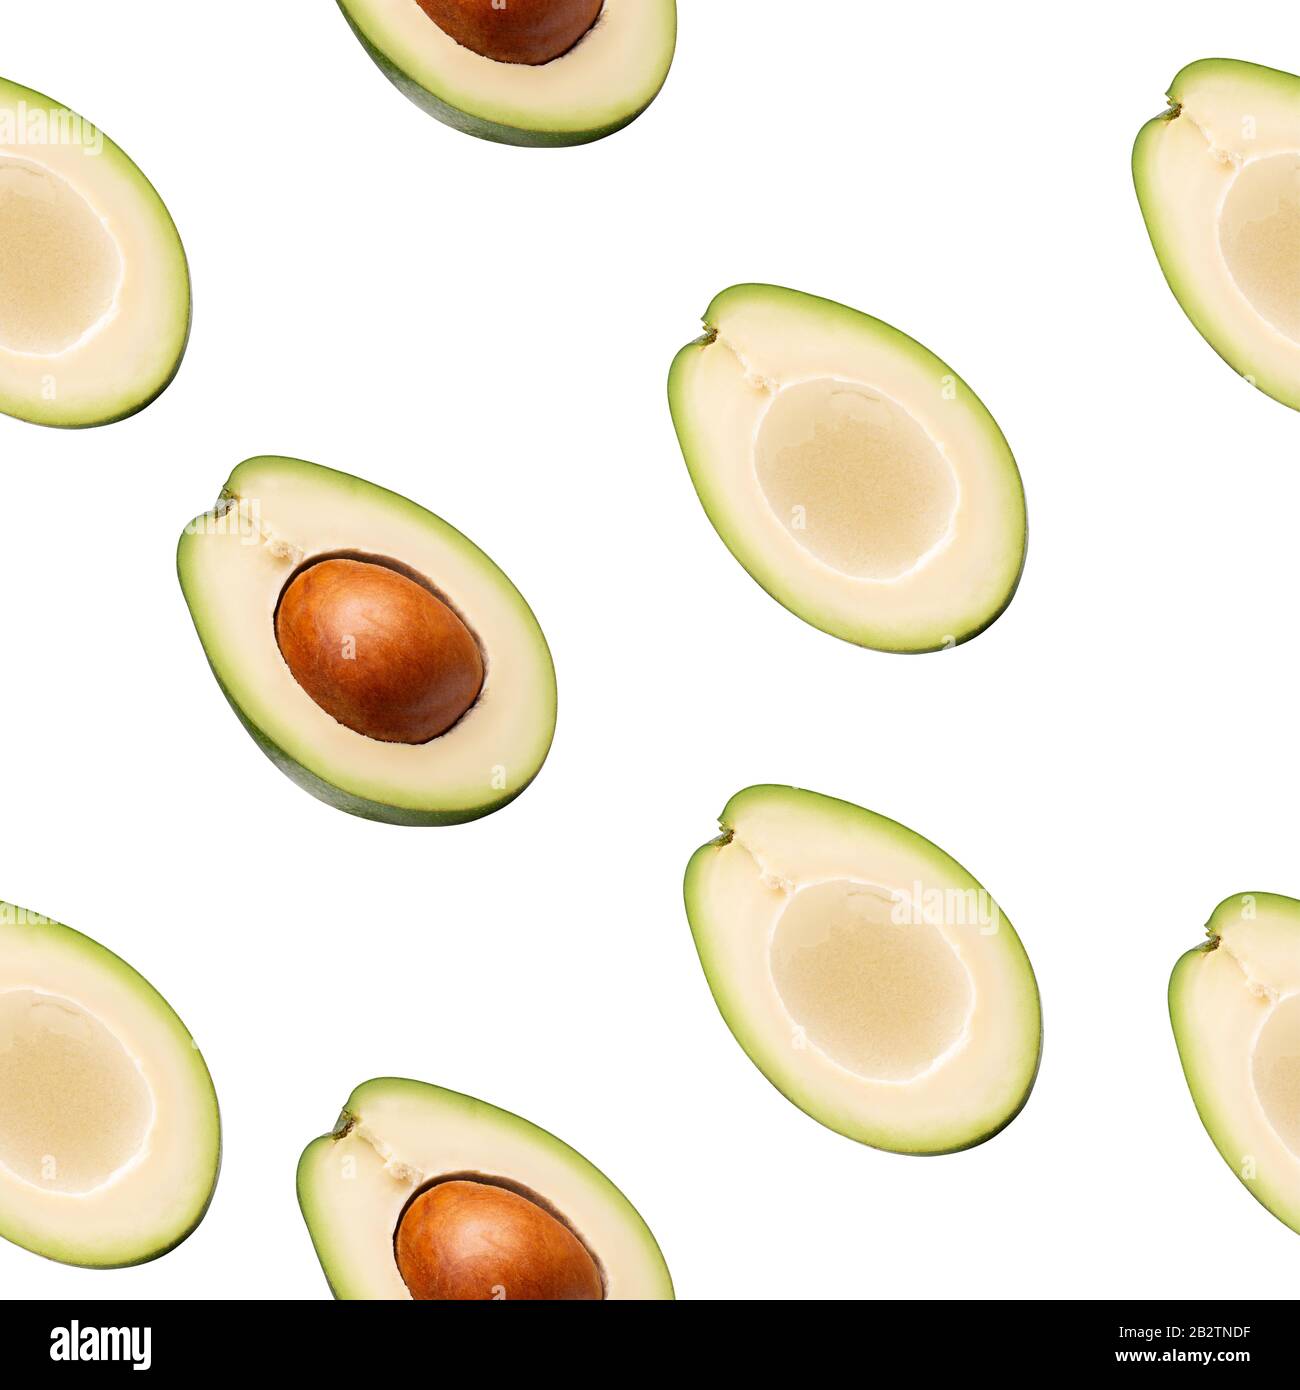 pattern with avocado slices on a white background. Stock Photo